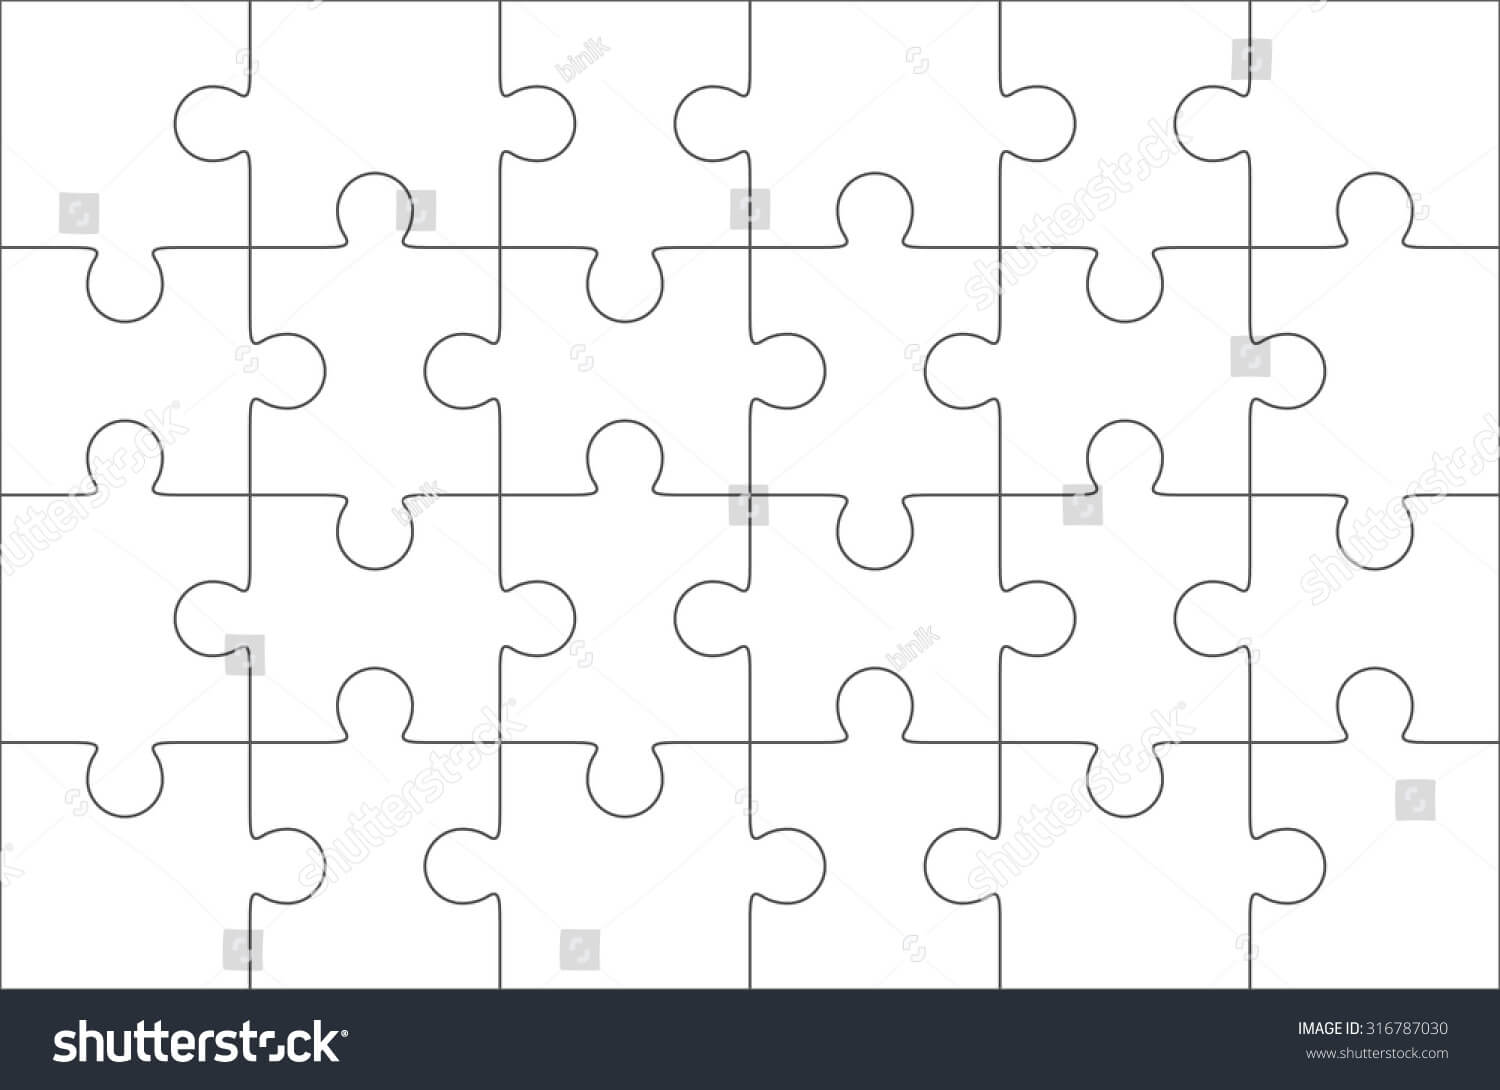 Jigsaw Puzzle Blank Template 6X4 Elements Stock Vector Intended For Blank Jigsaw Piece Template